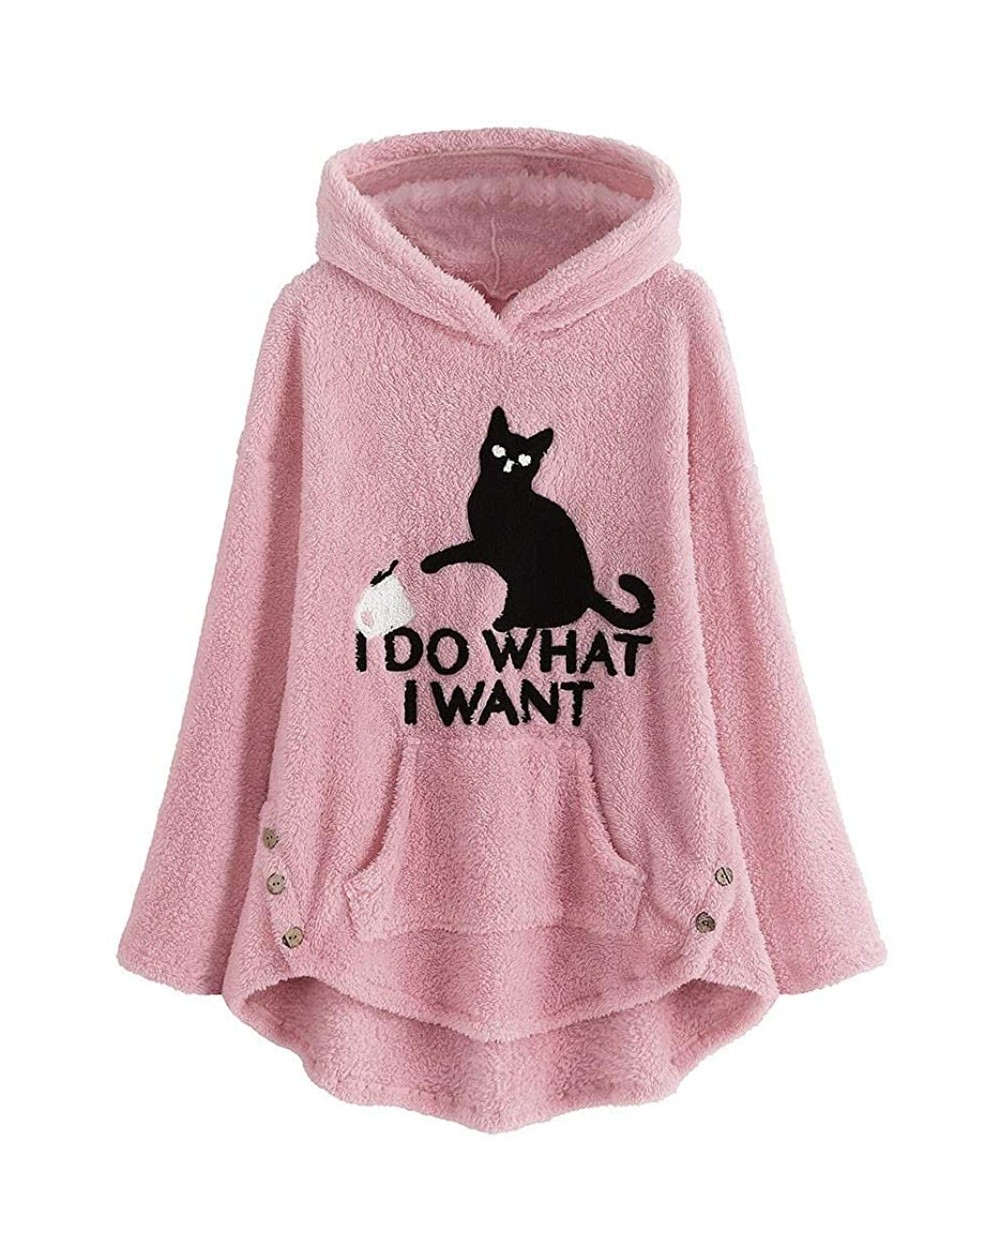 Banners Pullover Hoodie Women Plus Size-Womens Winter Warm Thick Plush Coat Jacket Cat Print Hooded Vintage Overcoat with Poc...